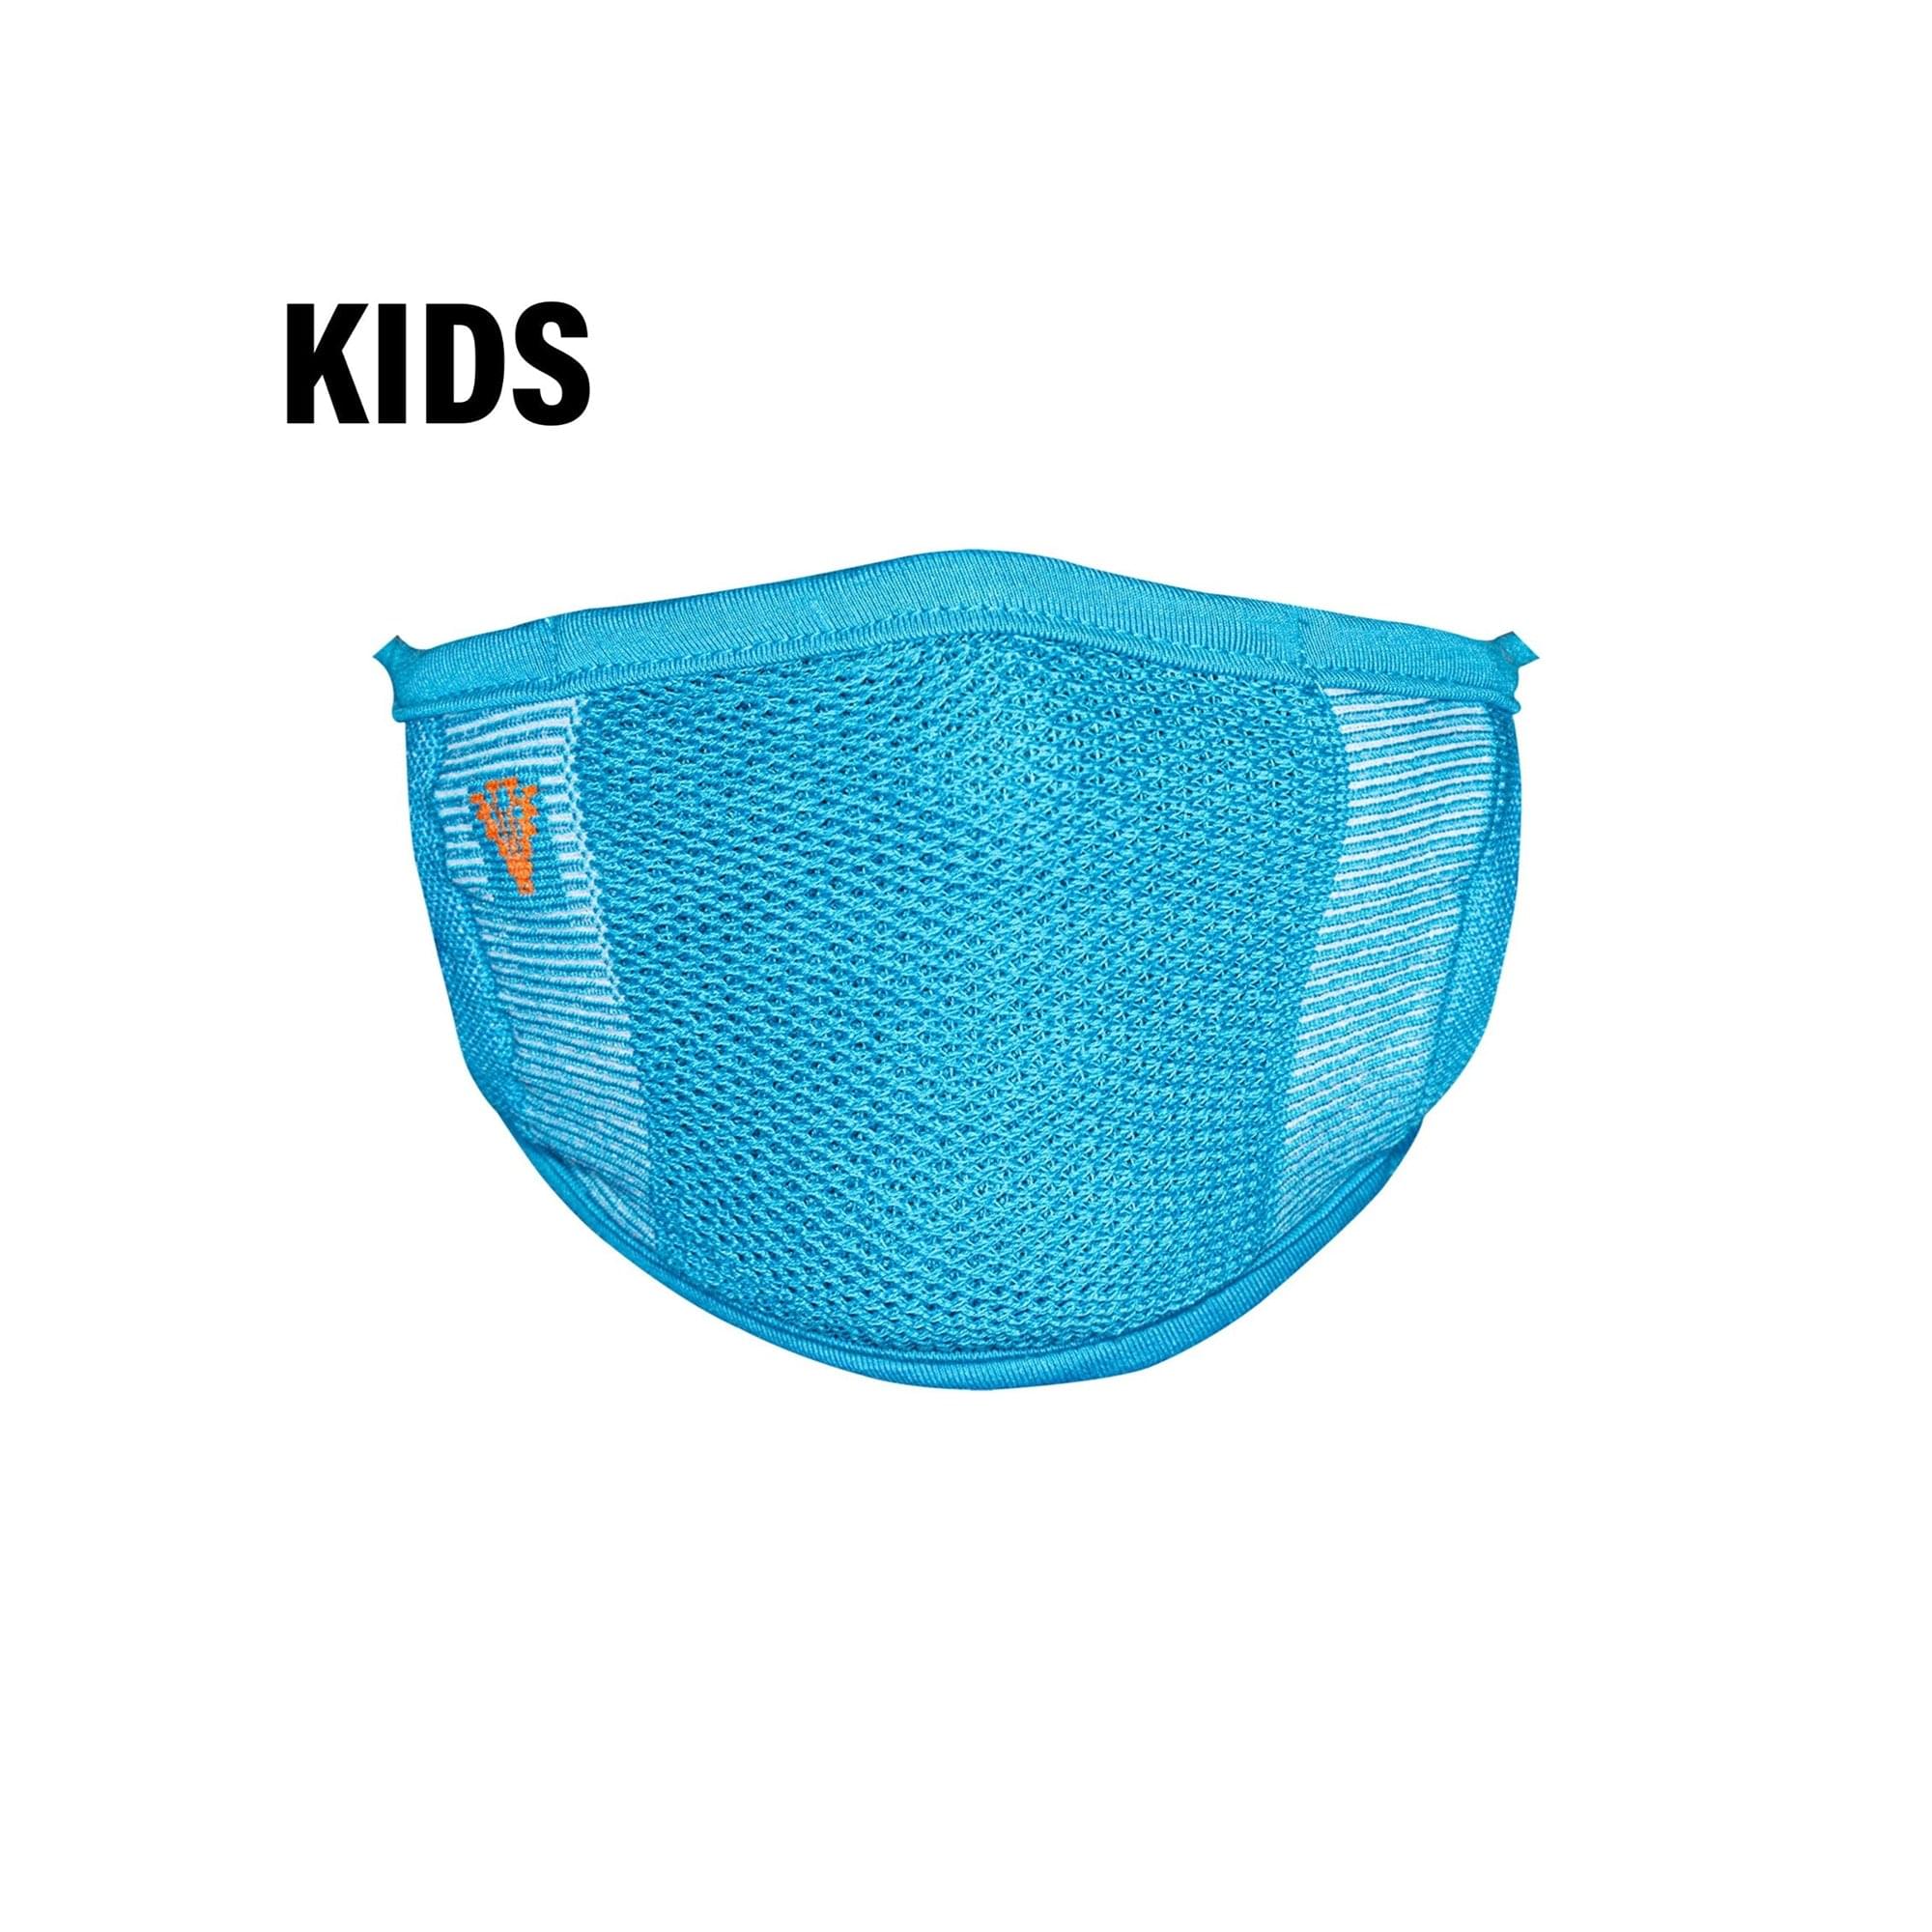 2-Layer Anti-Bacterial Protection Mask for Kids, Fashion Coloured -Size - Small (3-7 Yrs) - Pack of 1